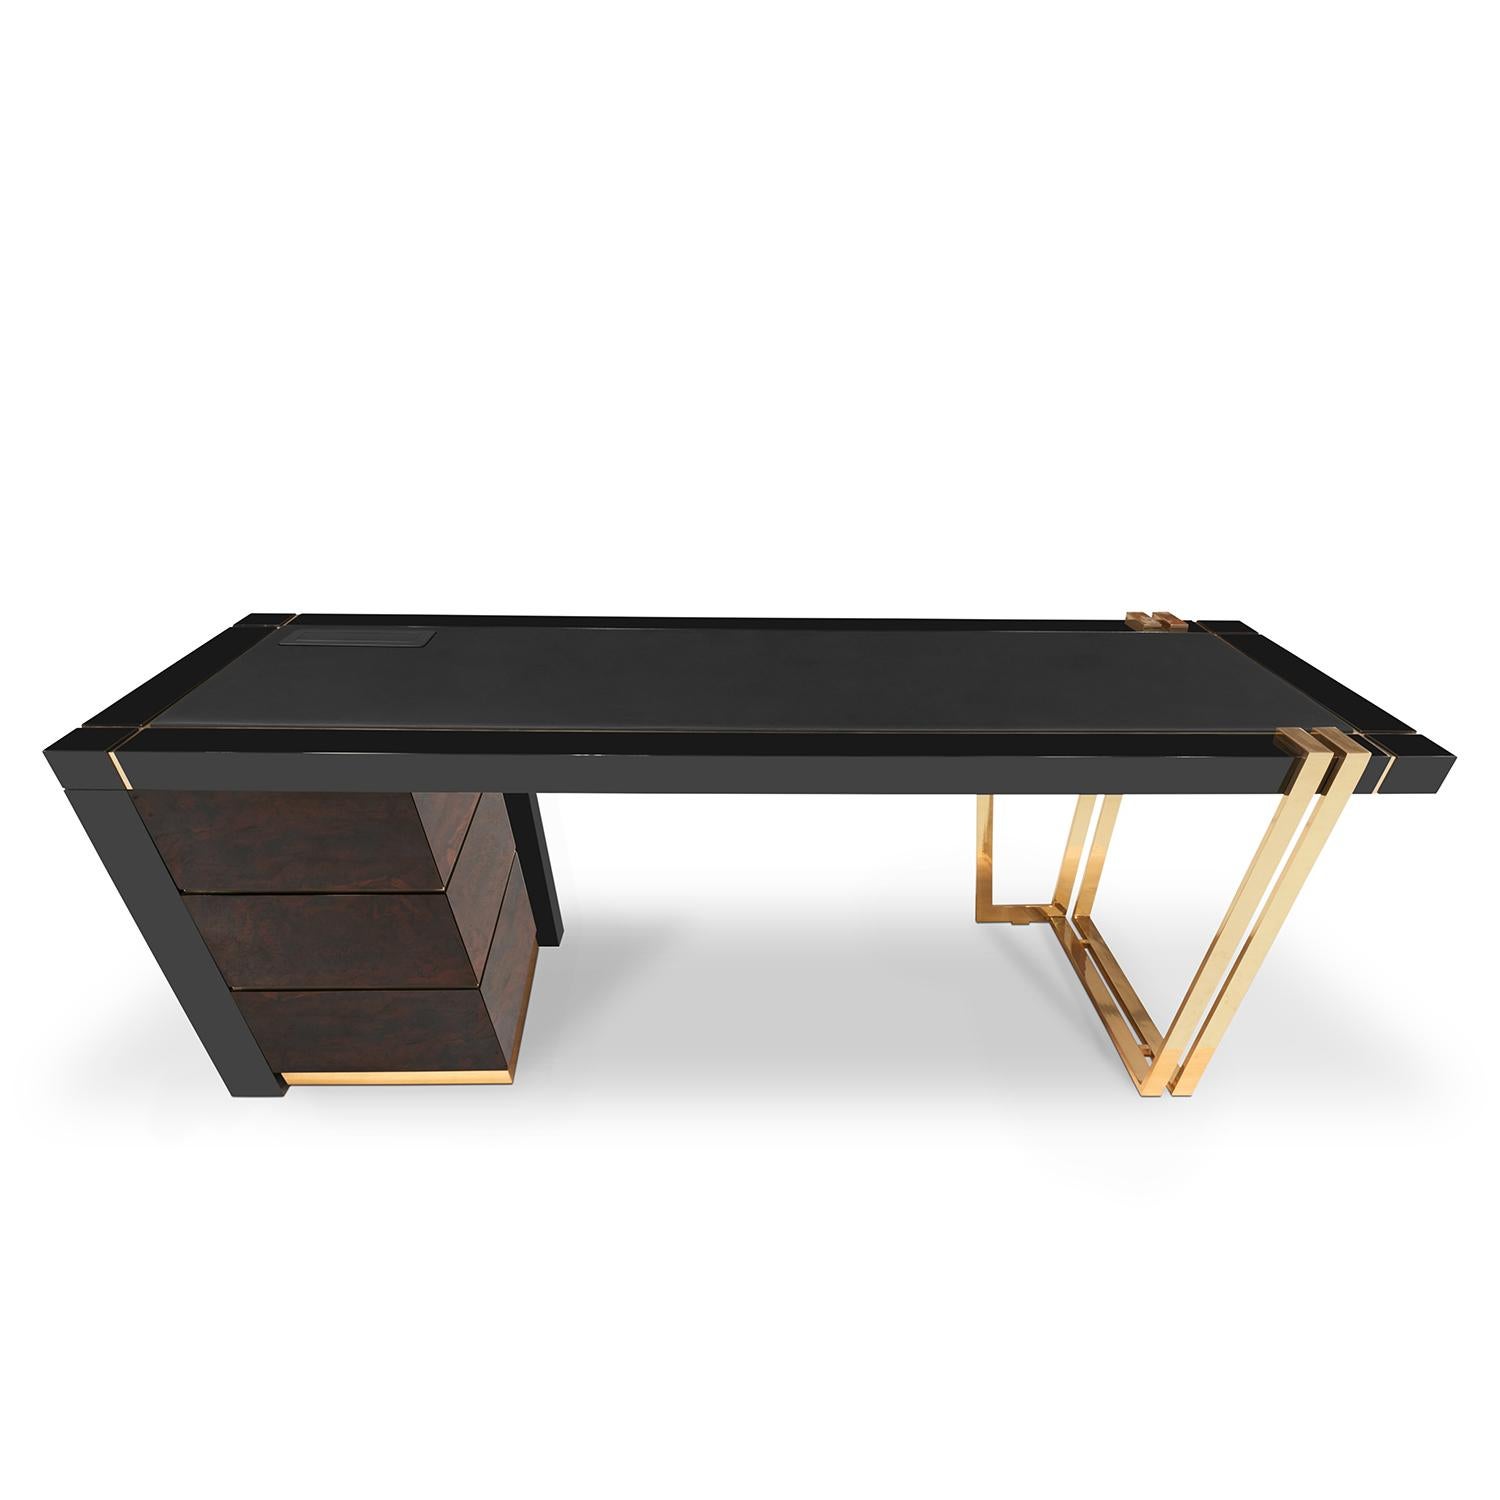 Desk Lupus with structure in solid walnut root
veneer and with solid brass in polished finish. 
With black lacquered top frame. Top is covered 
with black genuine leather with polished brass trim. 
With 3 drawers on easy glide metal runners.